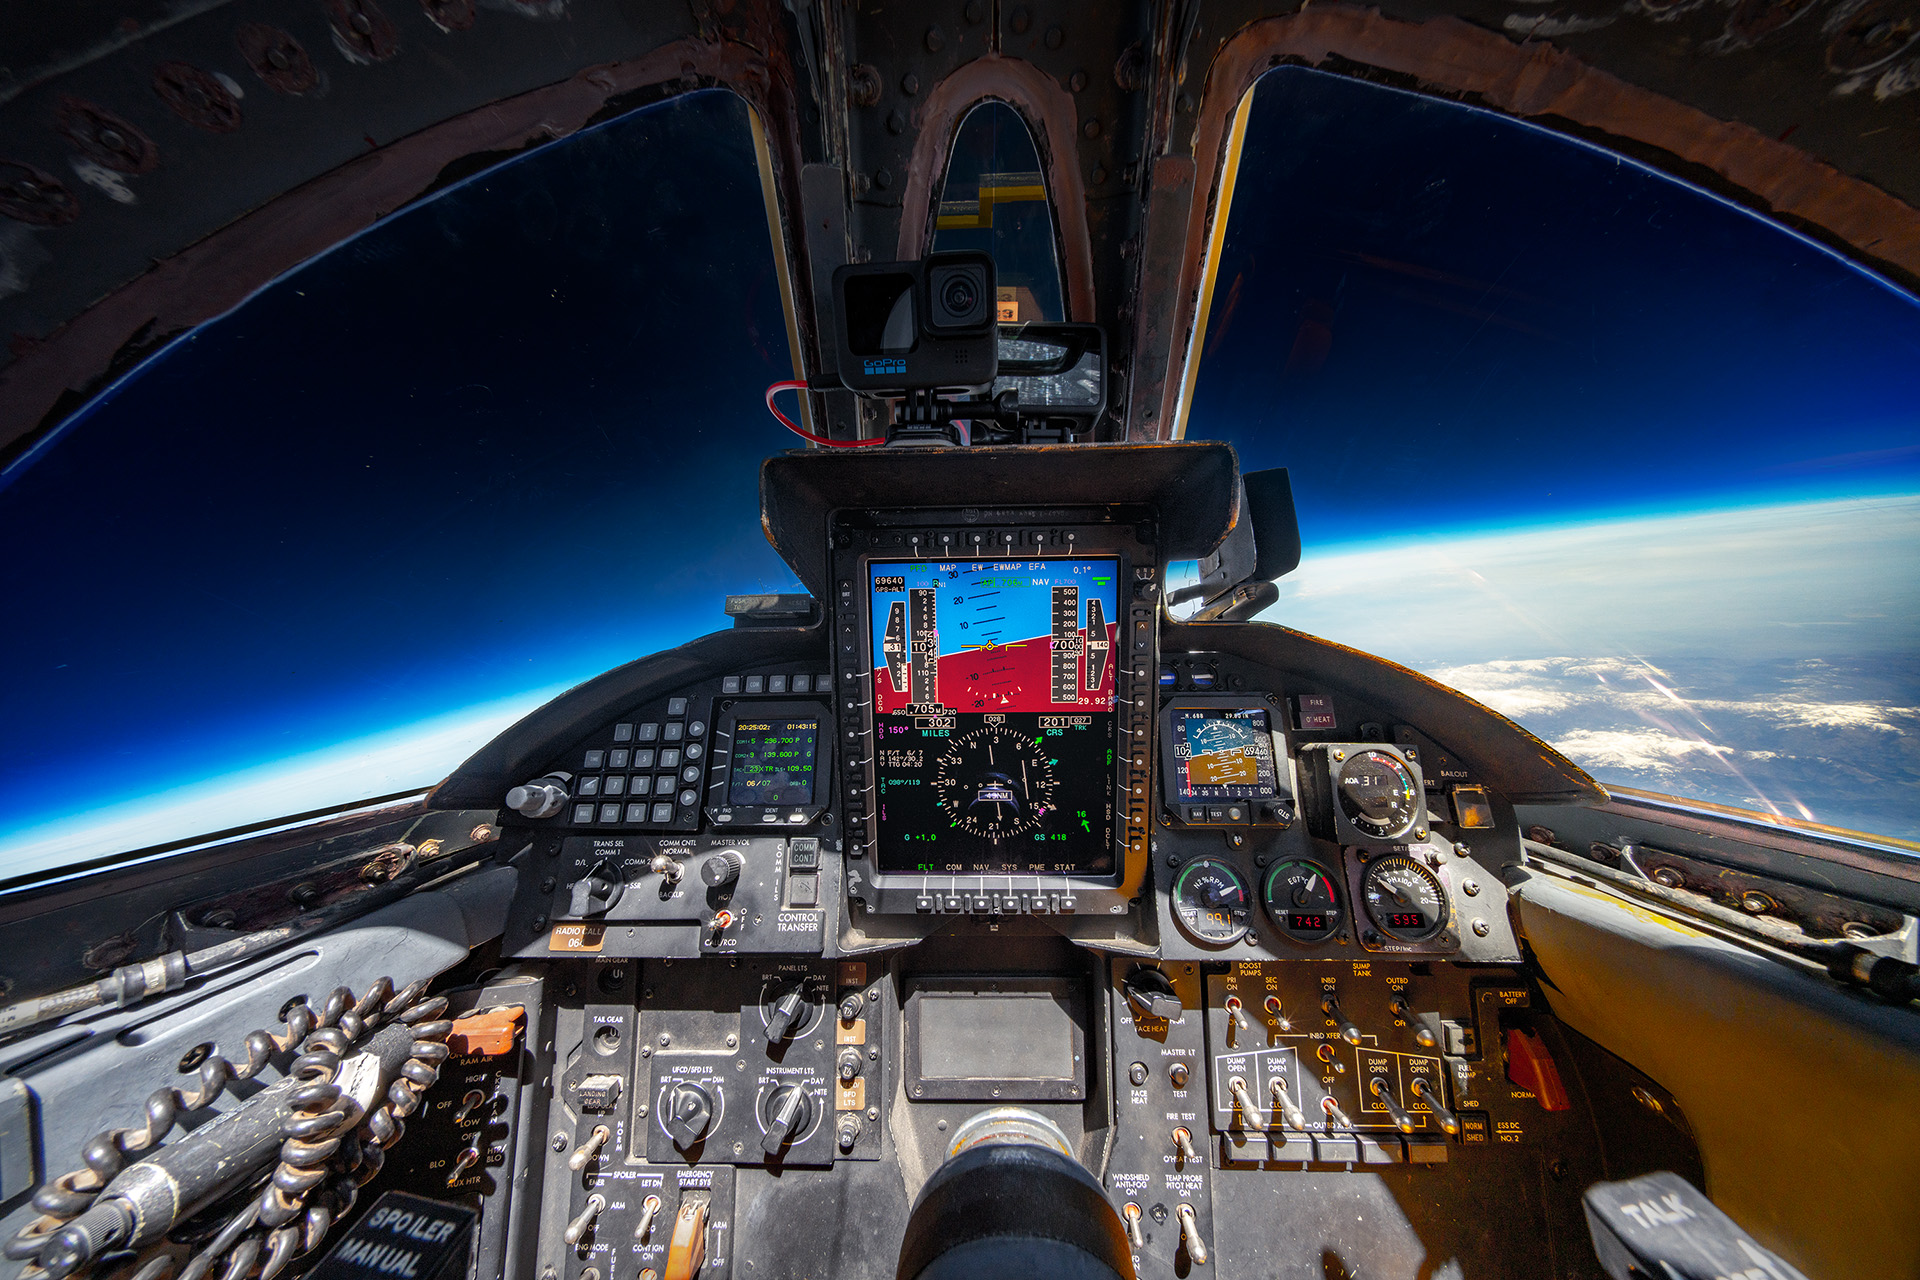 The cockpit of a U2 while at 70,000 feet